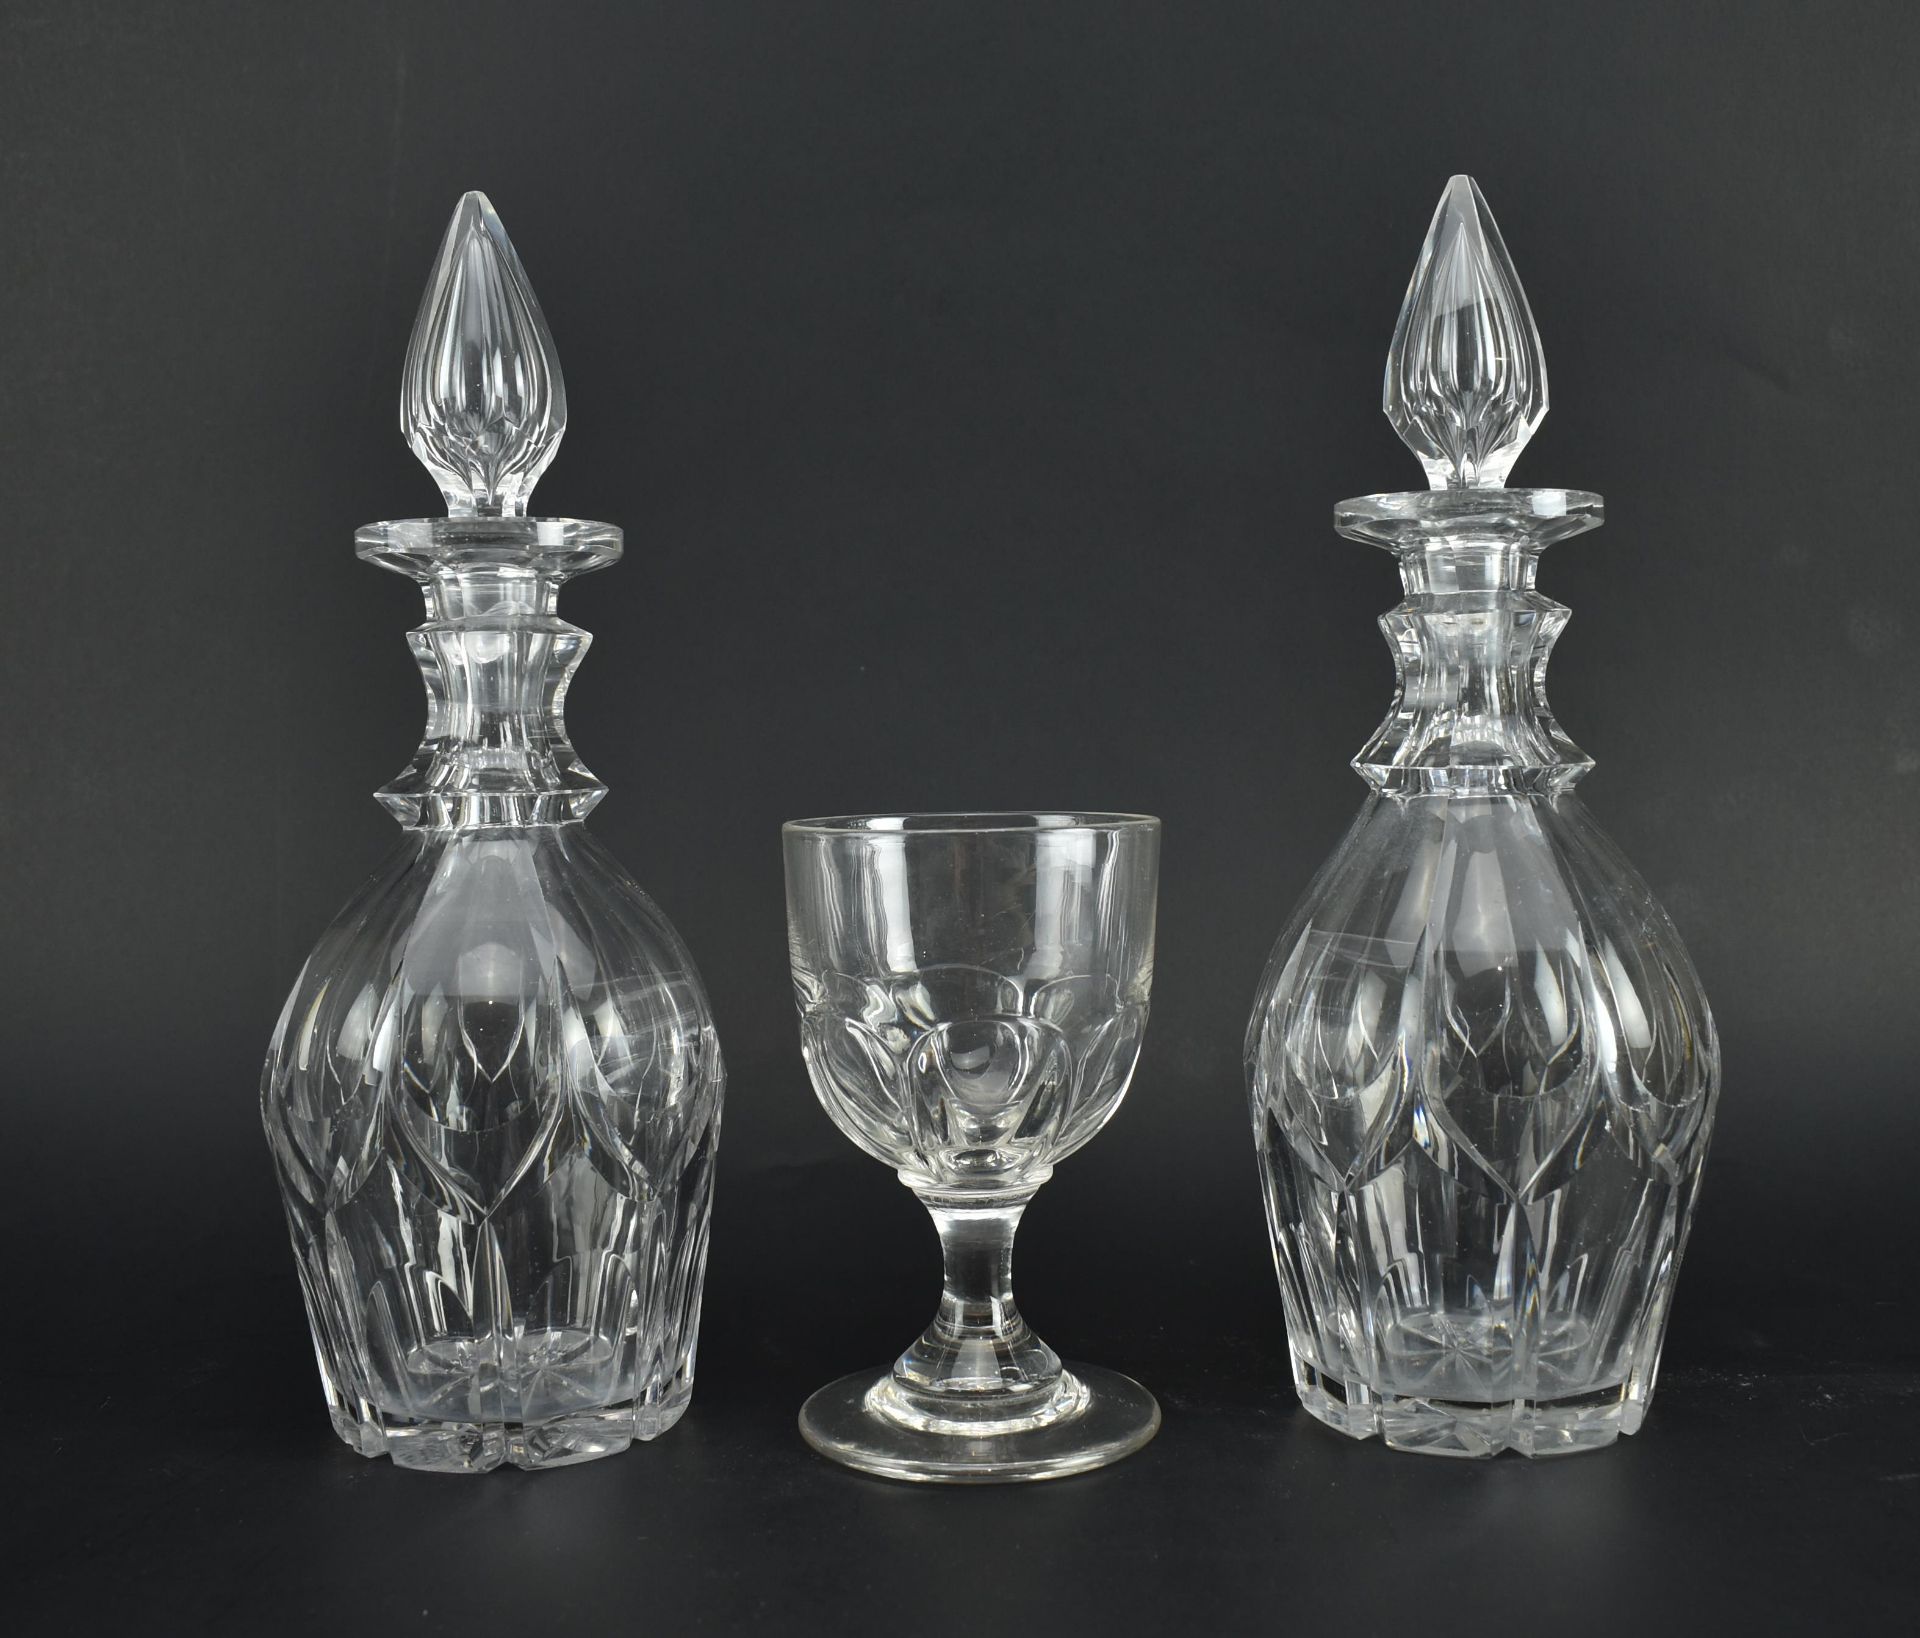 PAIR OF VICTORIAN GLASS DECANTERS & A GEORGE III DRINKING GLASS